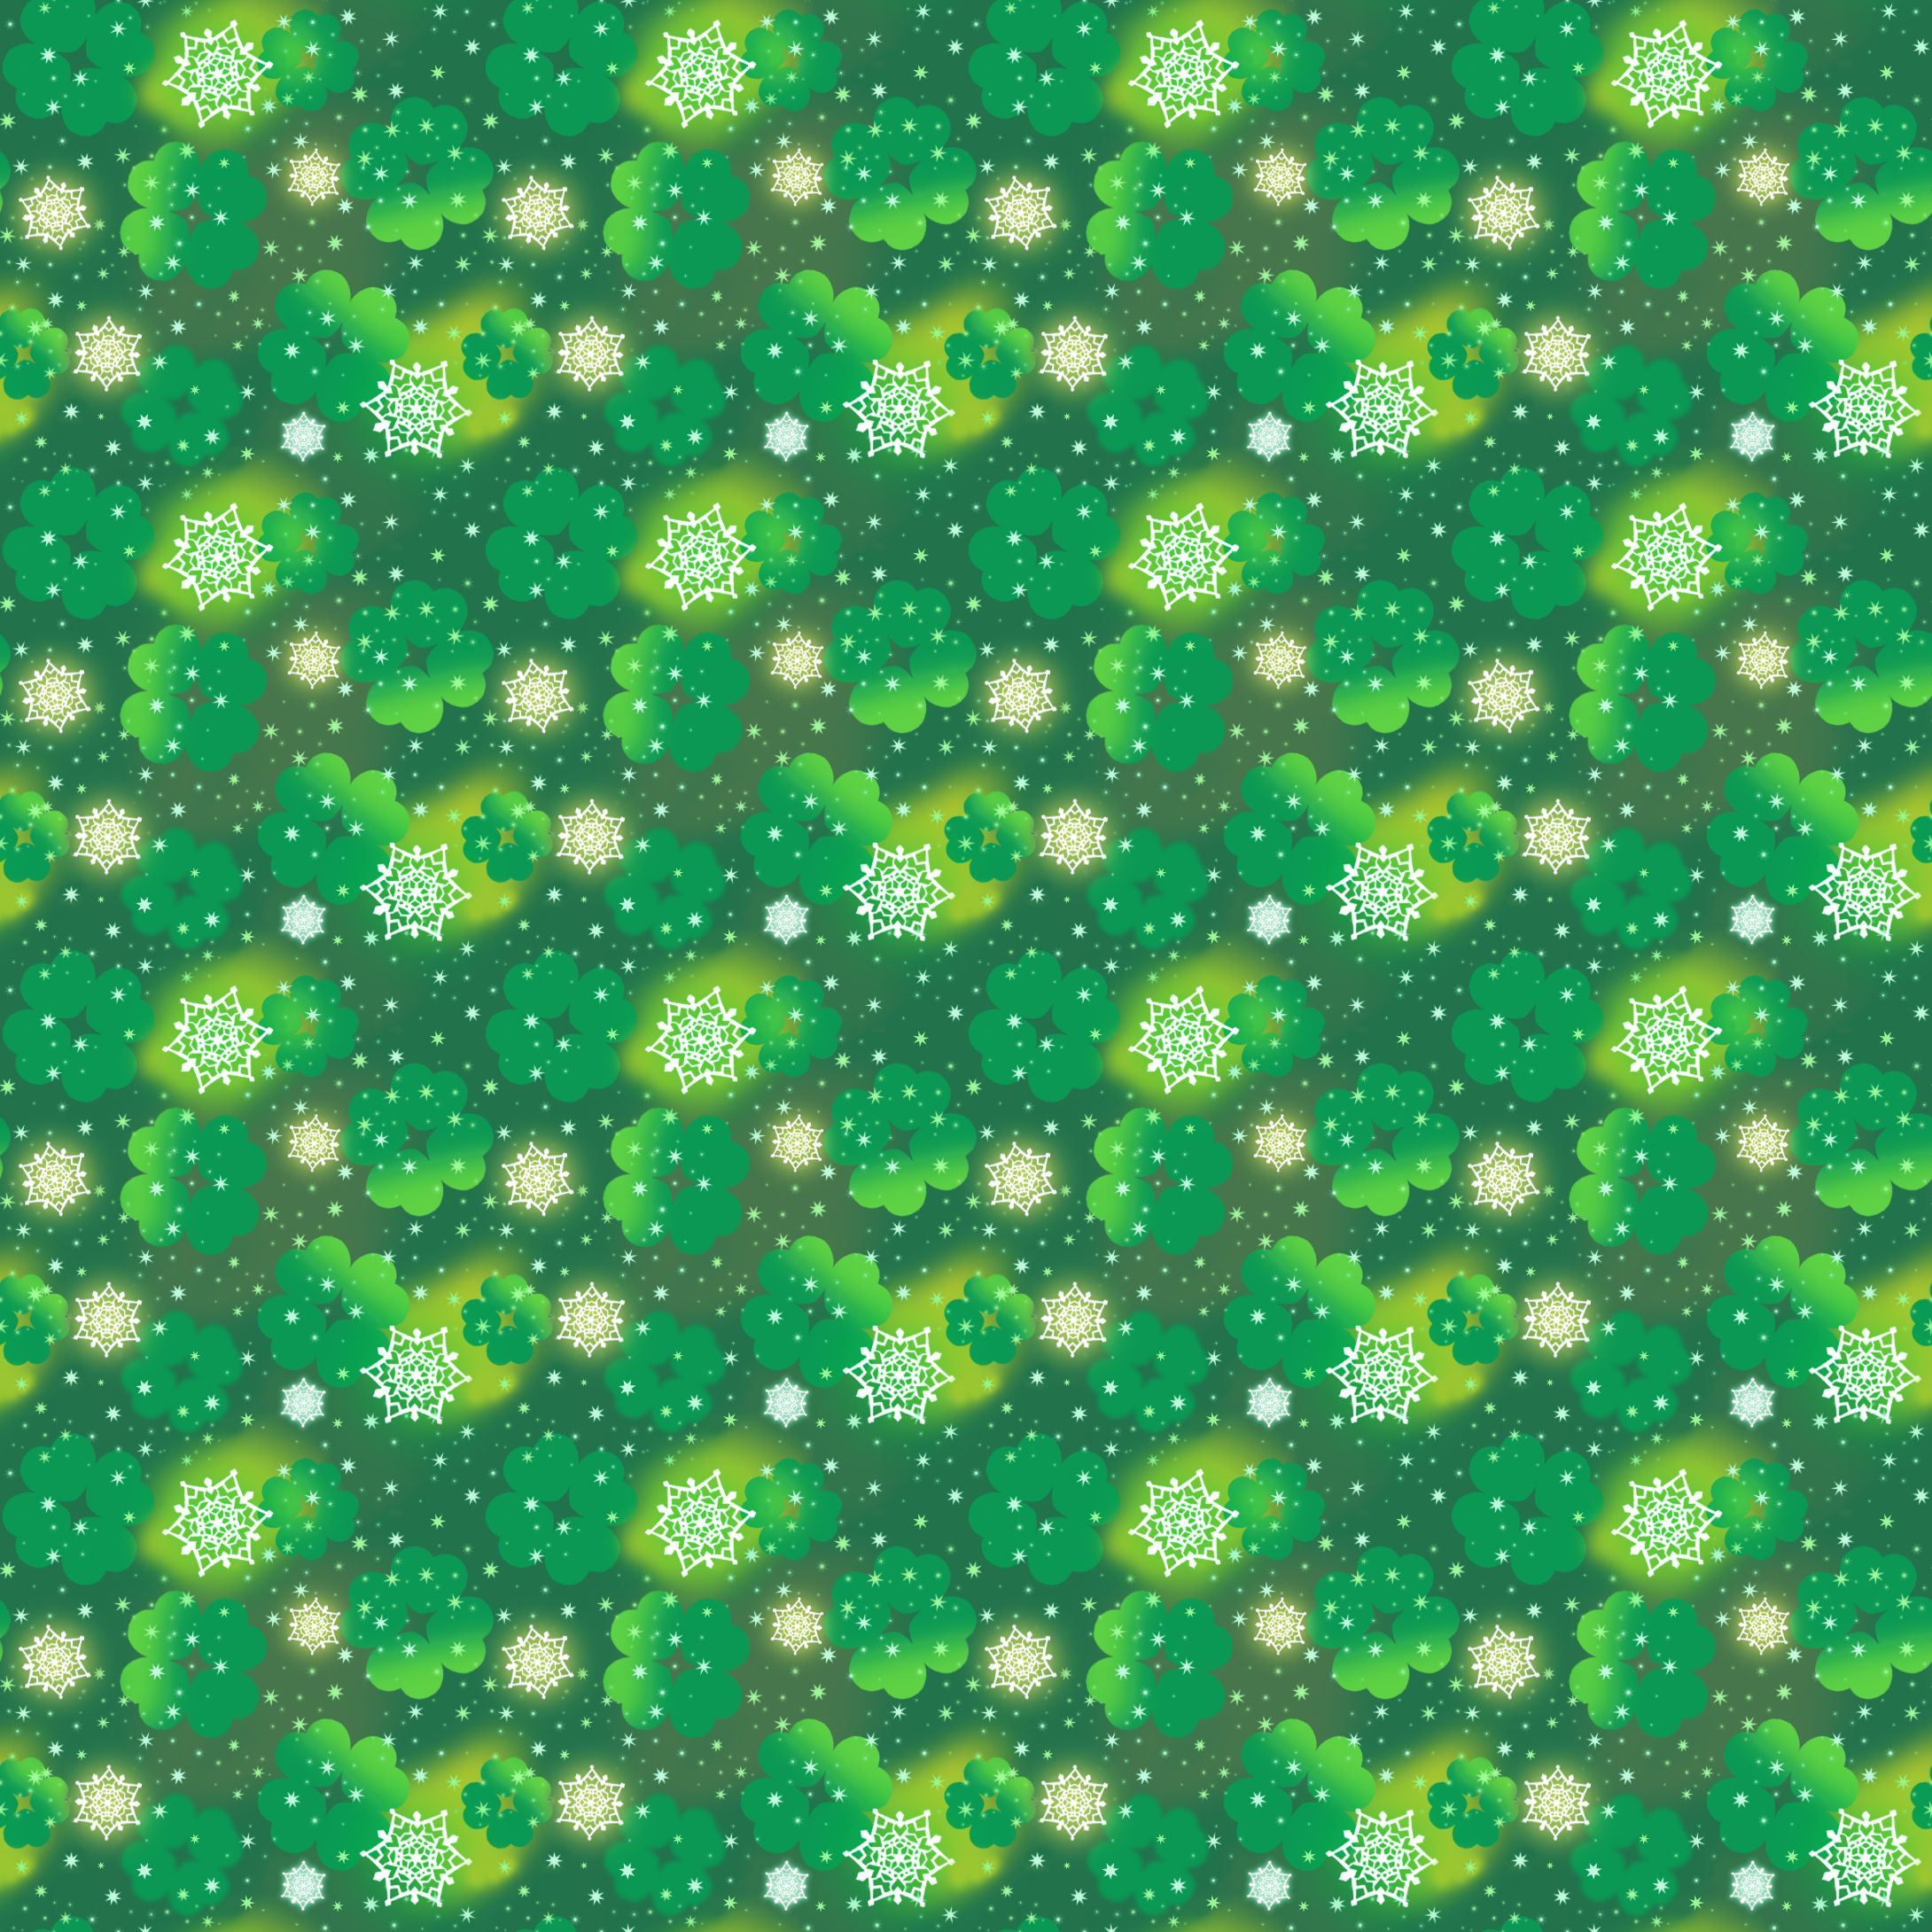 100857 download wallpaper textures, snowflakes, patterns, green, texture, clover screensavers and pictures for free